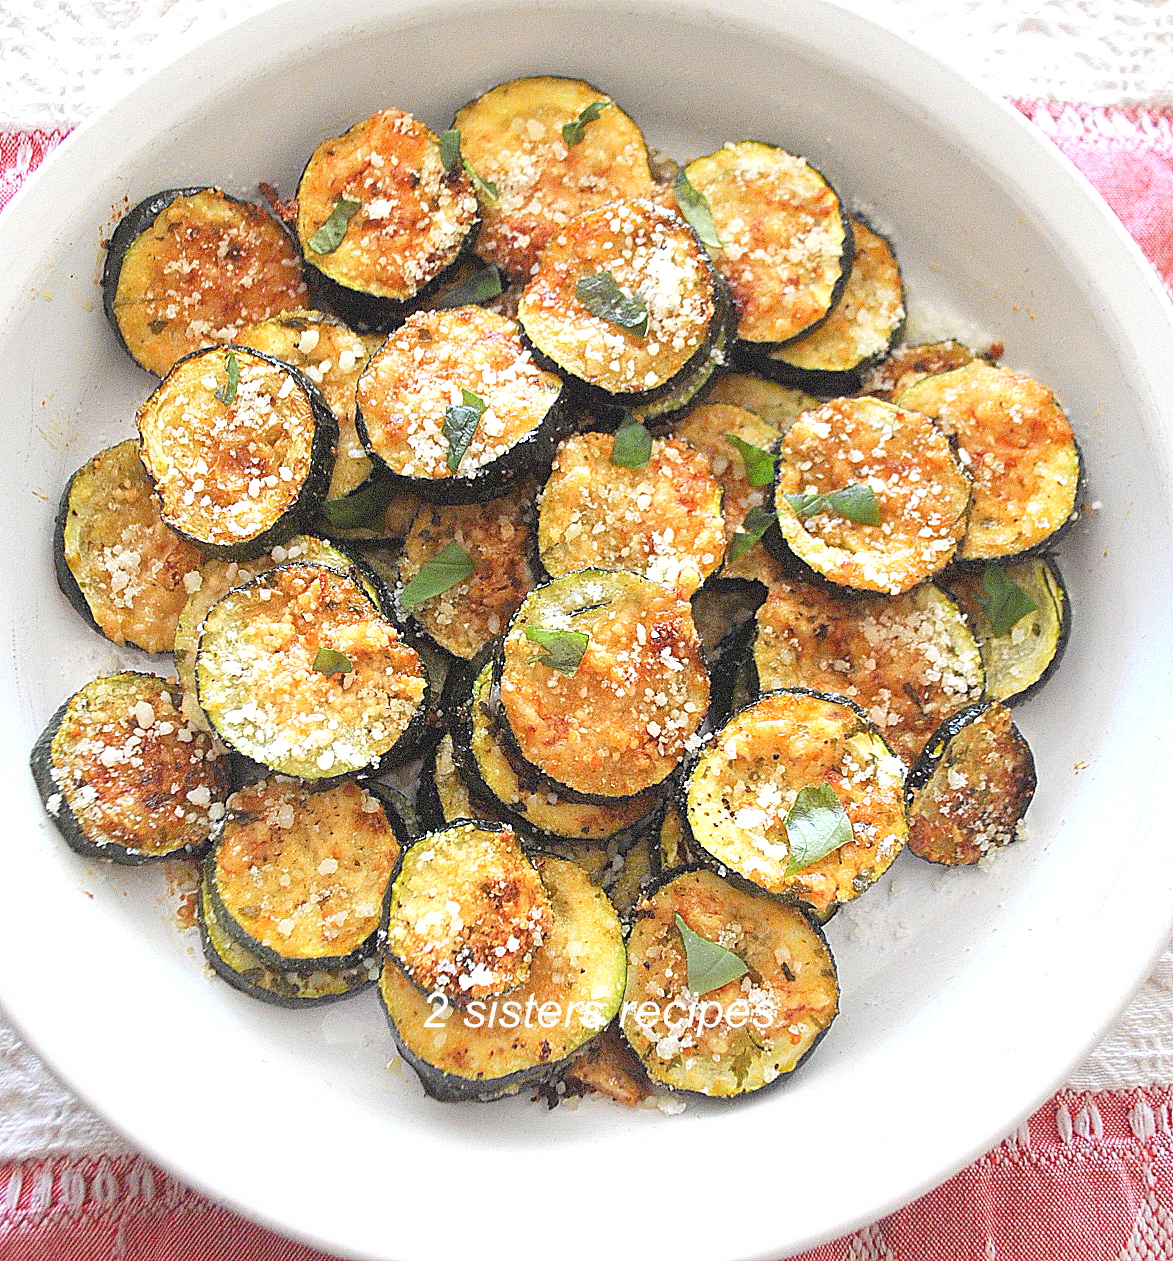 Roasted Parmesan Zucchini by 2sistersrecipes.com